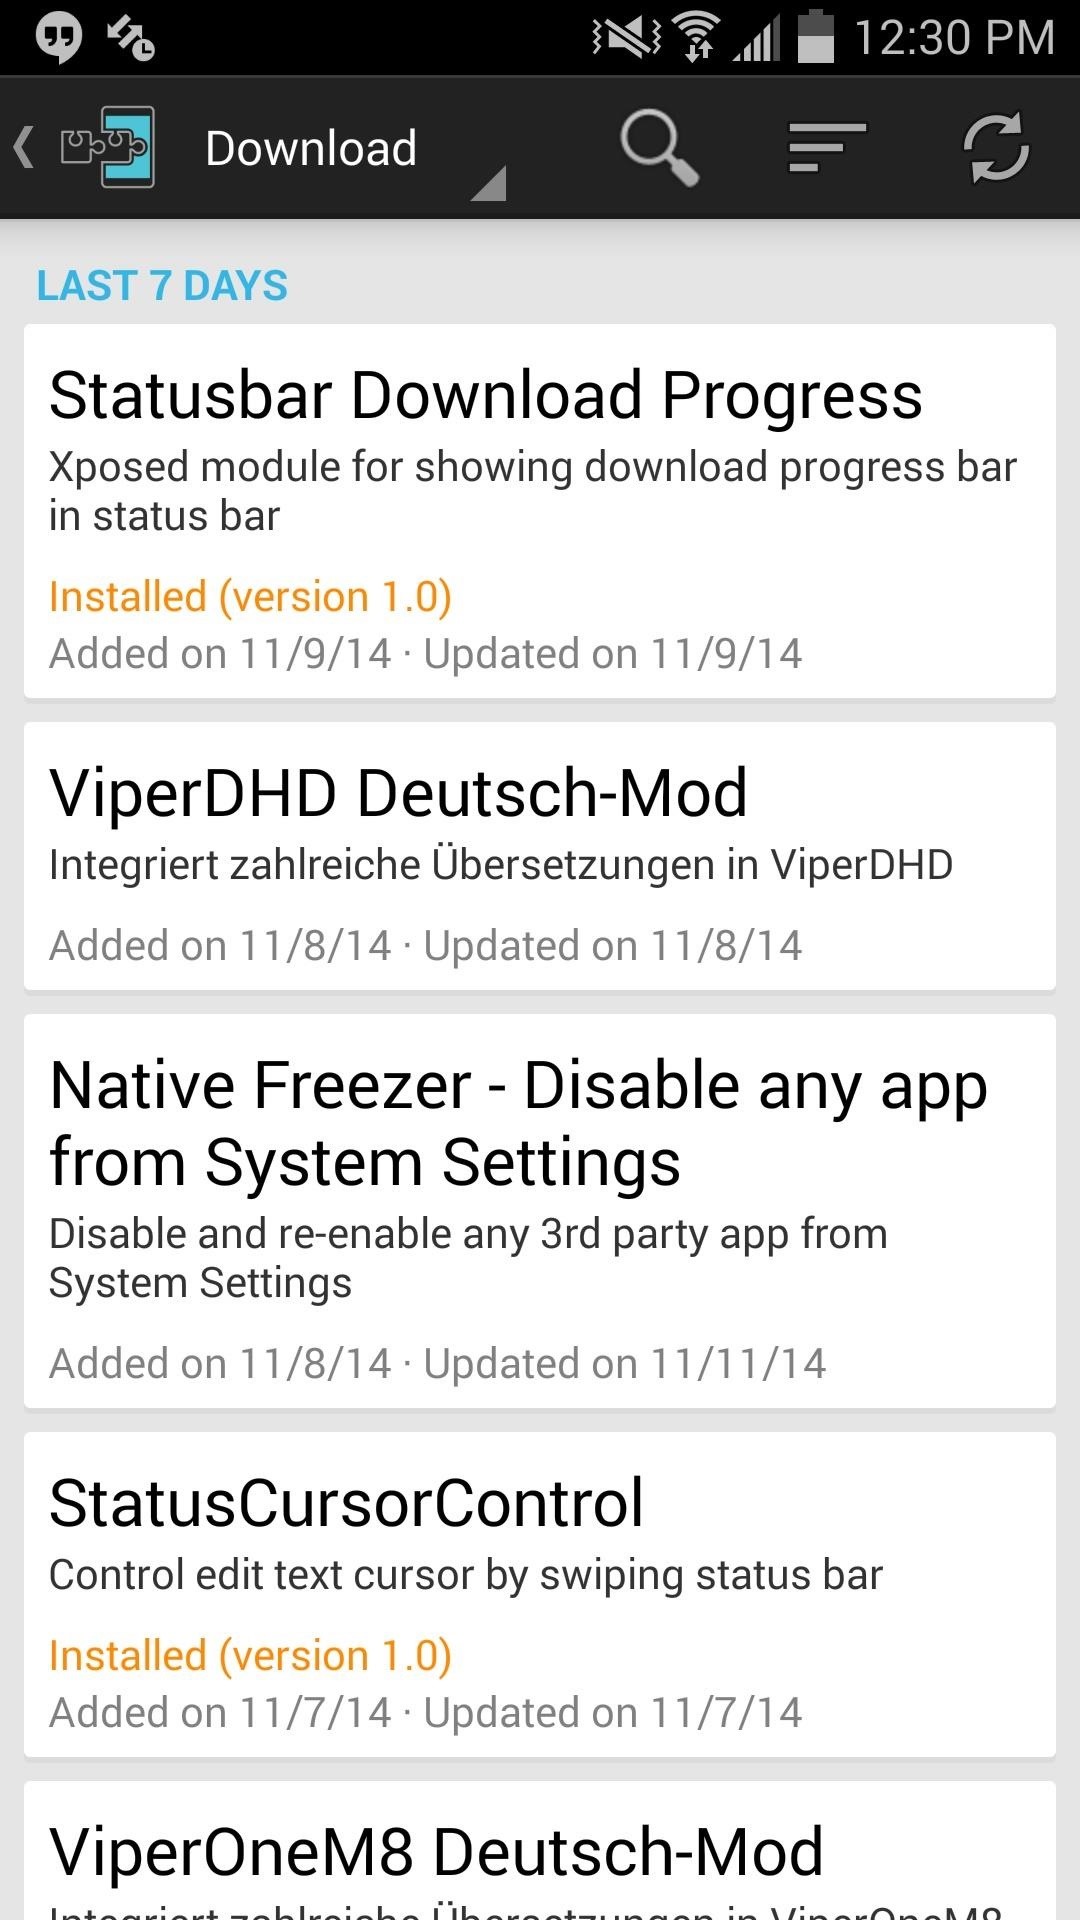 Add an Indicator for Download Progress to Your Android’s Status Bar